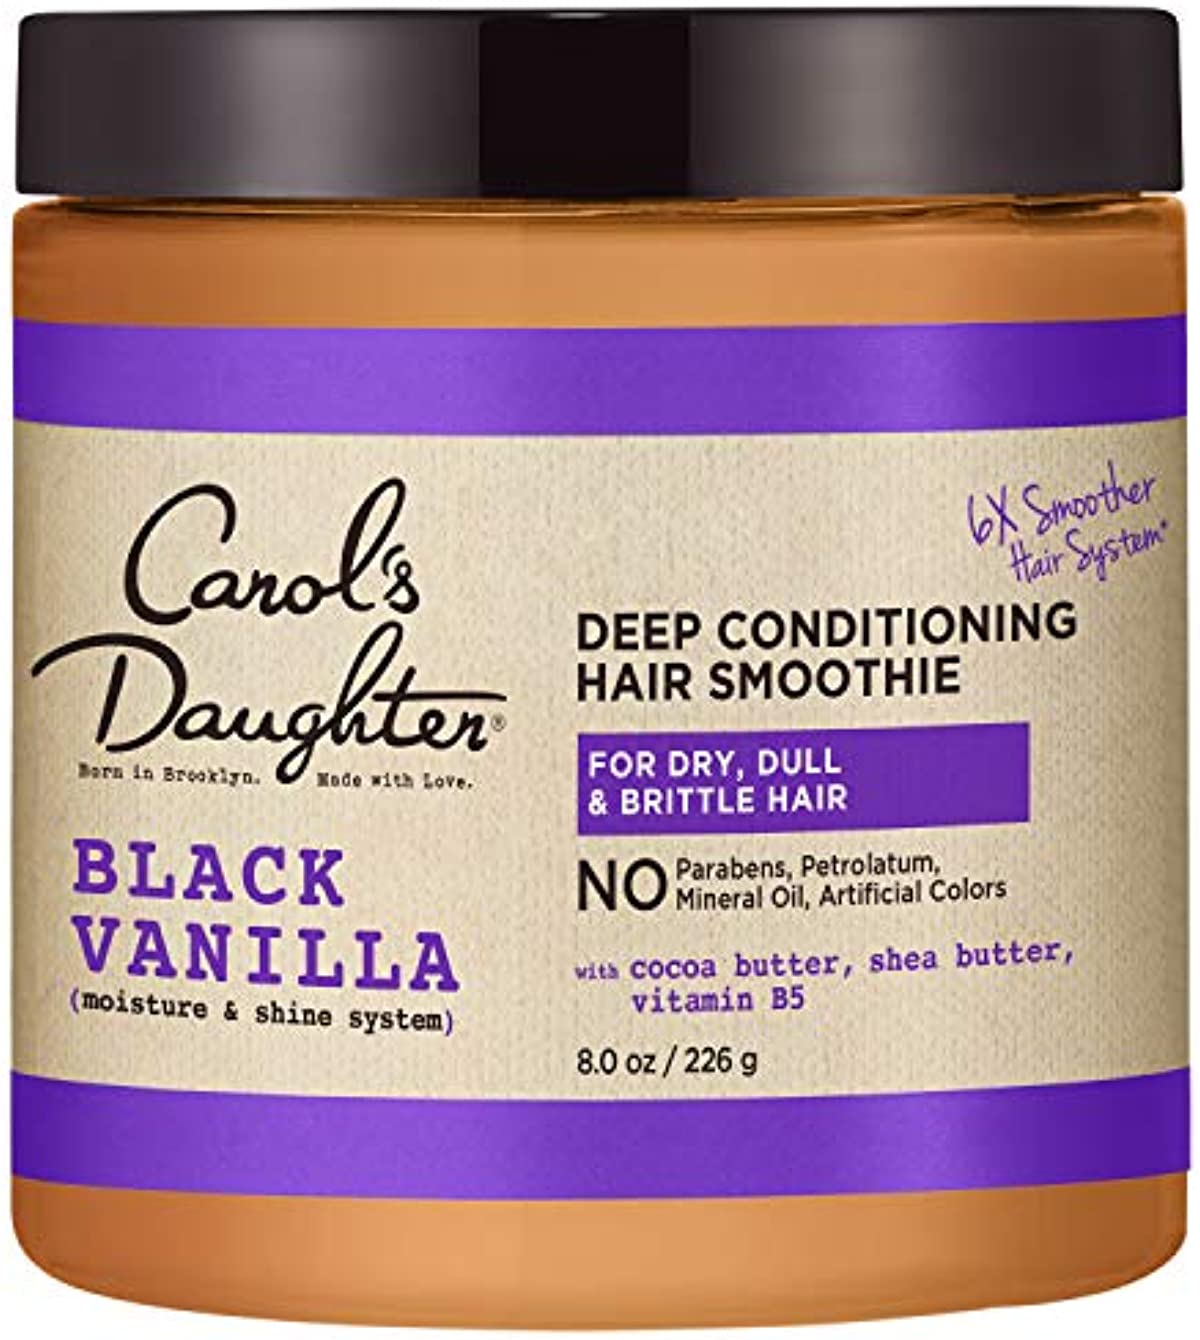 Carol\'s Daughter Black Vanilla Moisture and Shine Hair Smoothie For Dry Hair and Dull Hair, with Shea Butter, Cocoa Butter and Vitamin B5, Paraben Free Hair Treatment, 8 oz (Packaging May Vary)